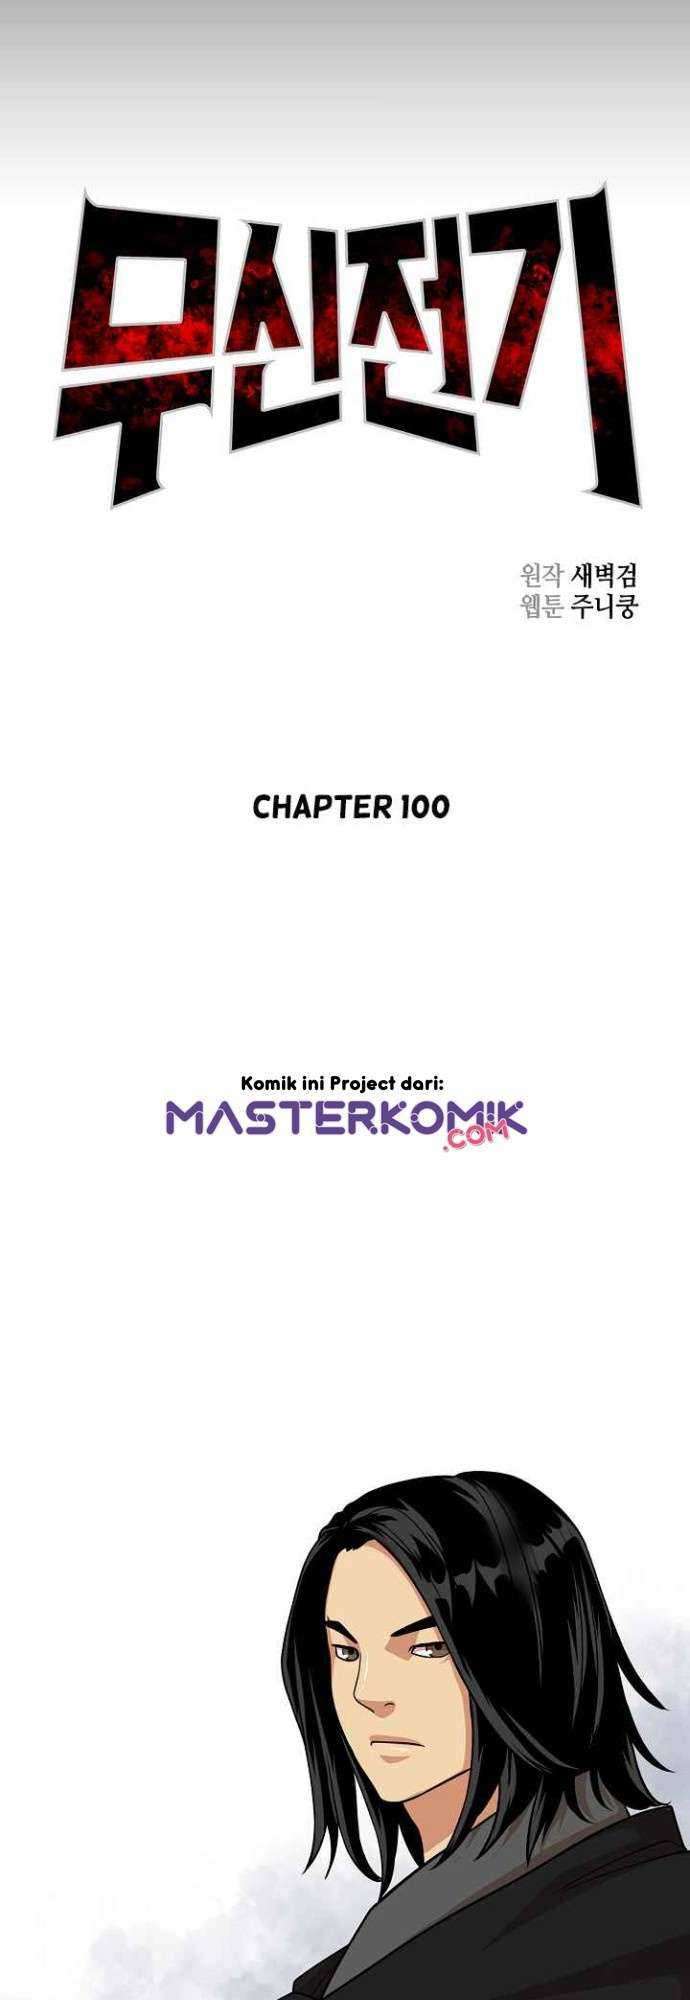 Record of the War God Chapter 100